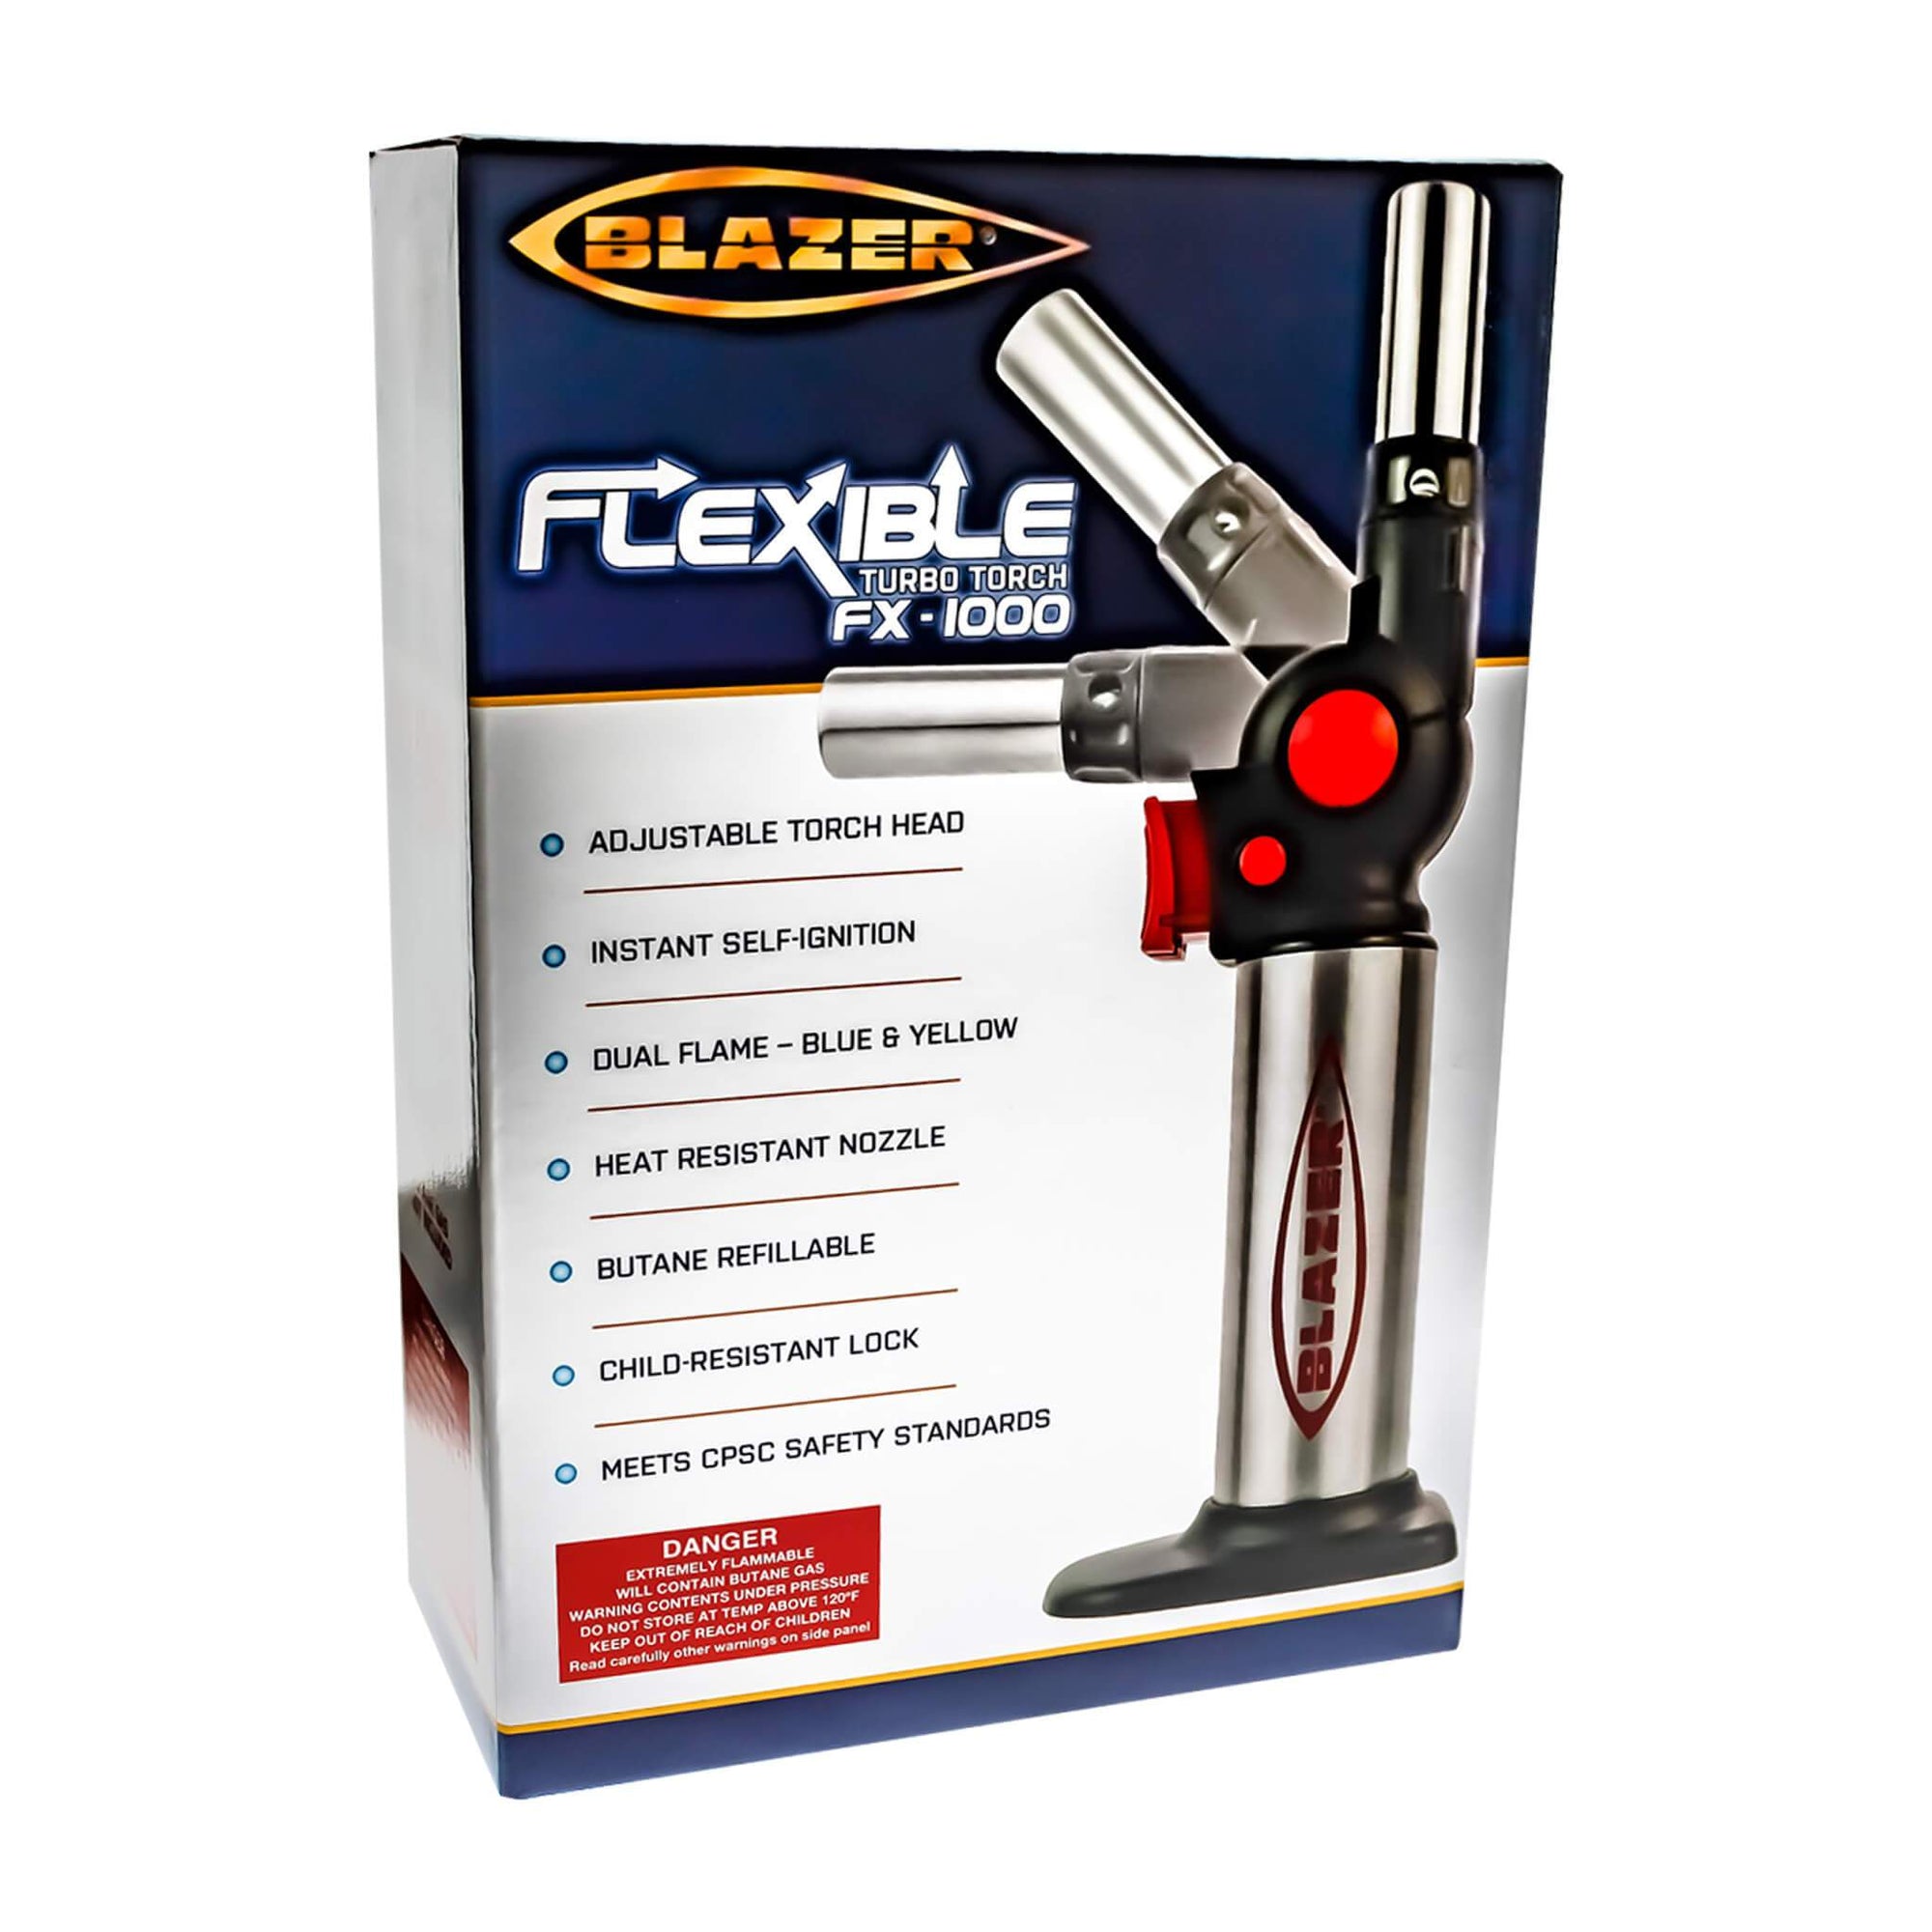 Blazer Flexible Turbo Torch | Red & Black Boxed View | the dabbing specialists